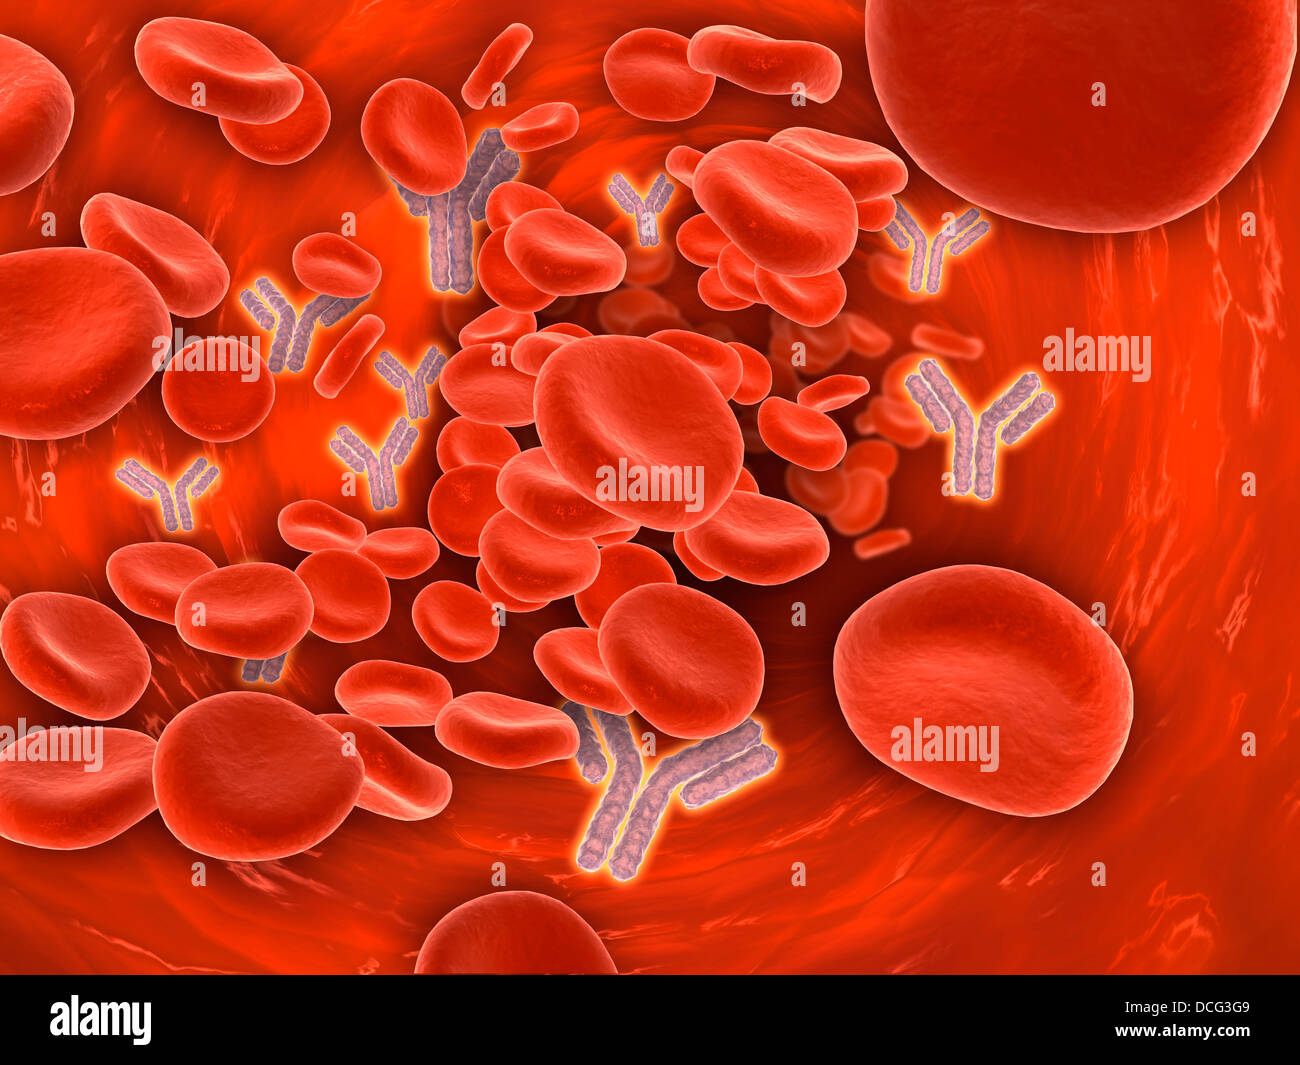 Conceptual image of chromosomes inside the blood stream. Stock Photo